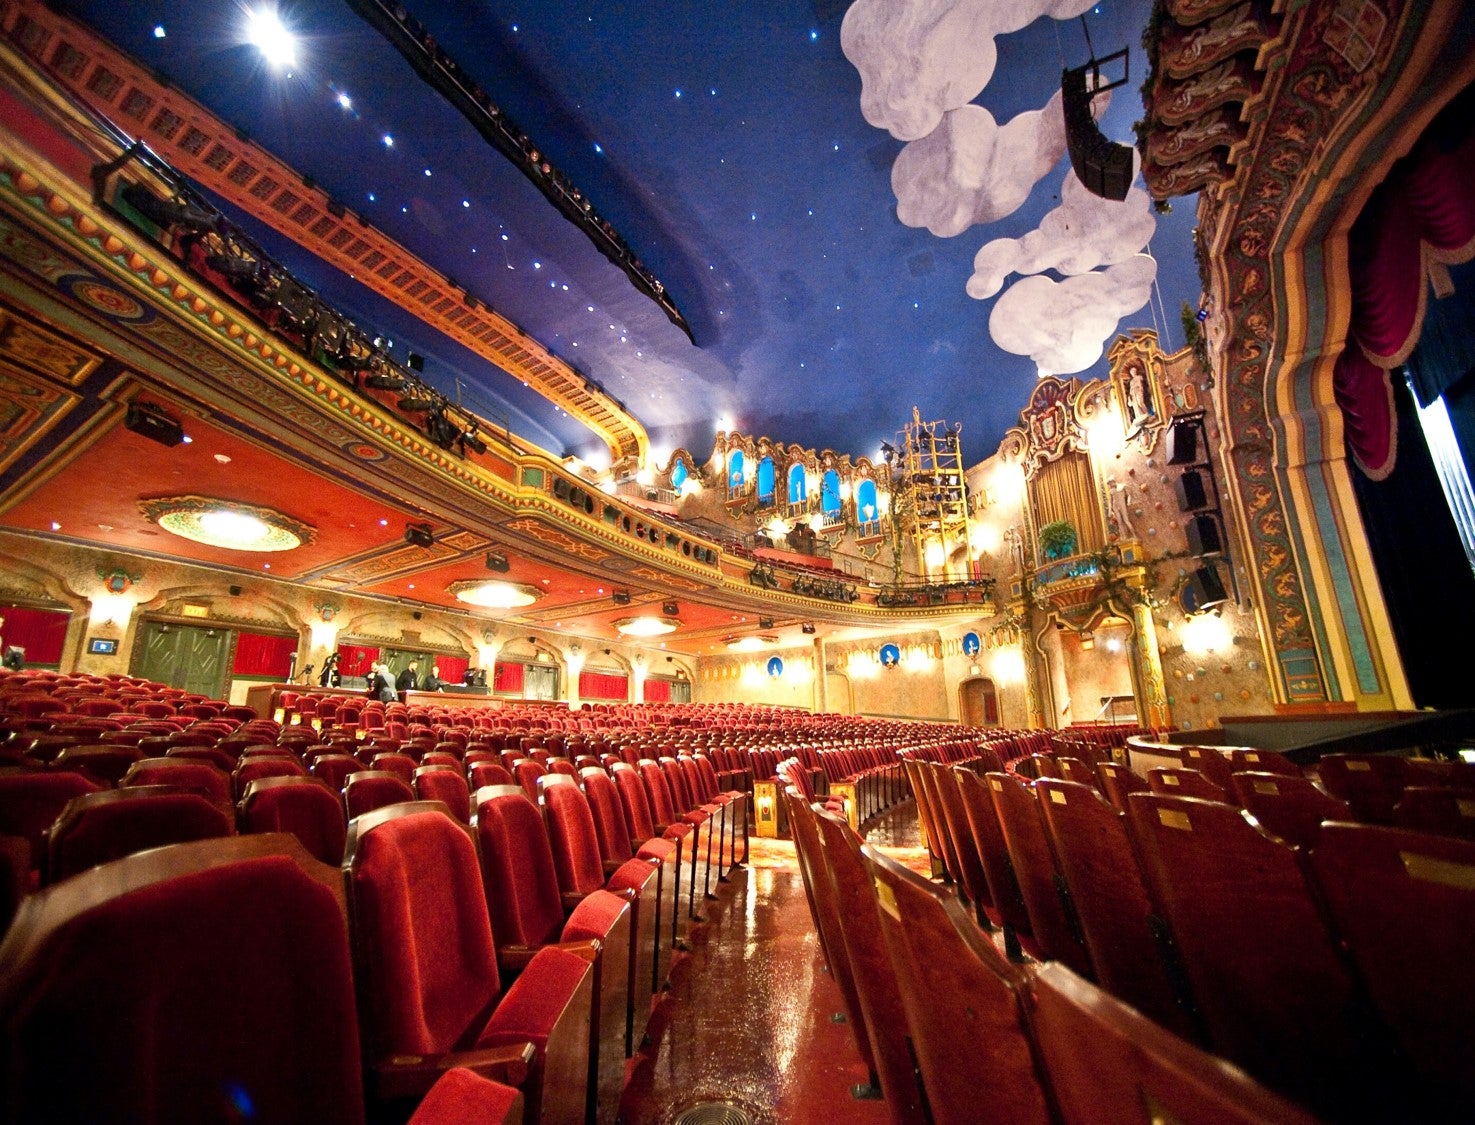 carpenter-theatre-ranked-in-top-50-theaters-in-the-world-by-pollstar